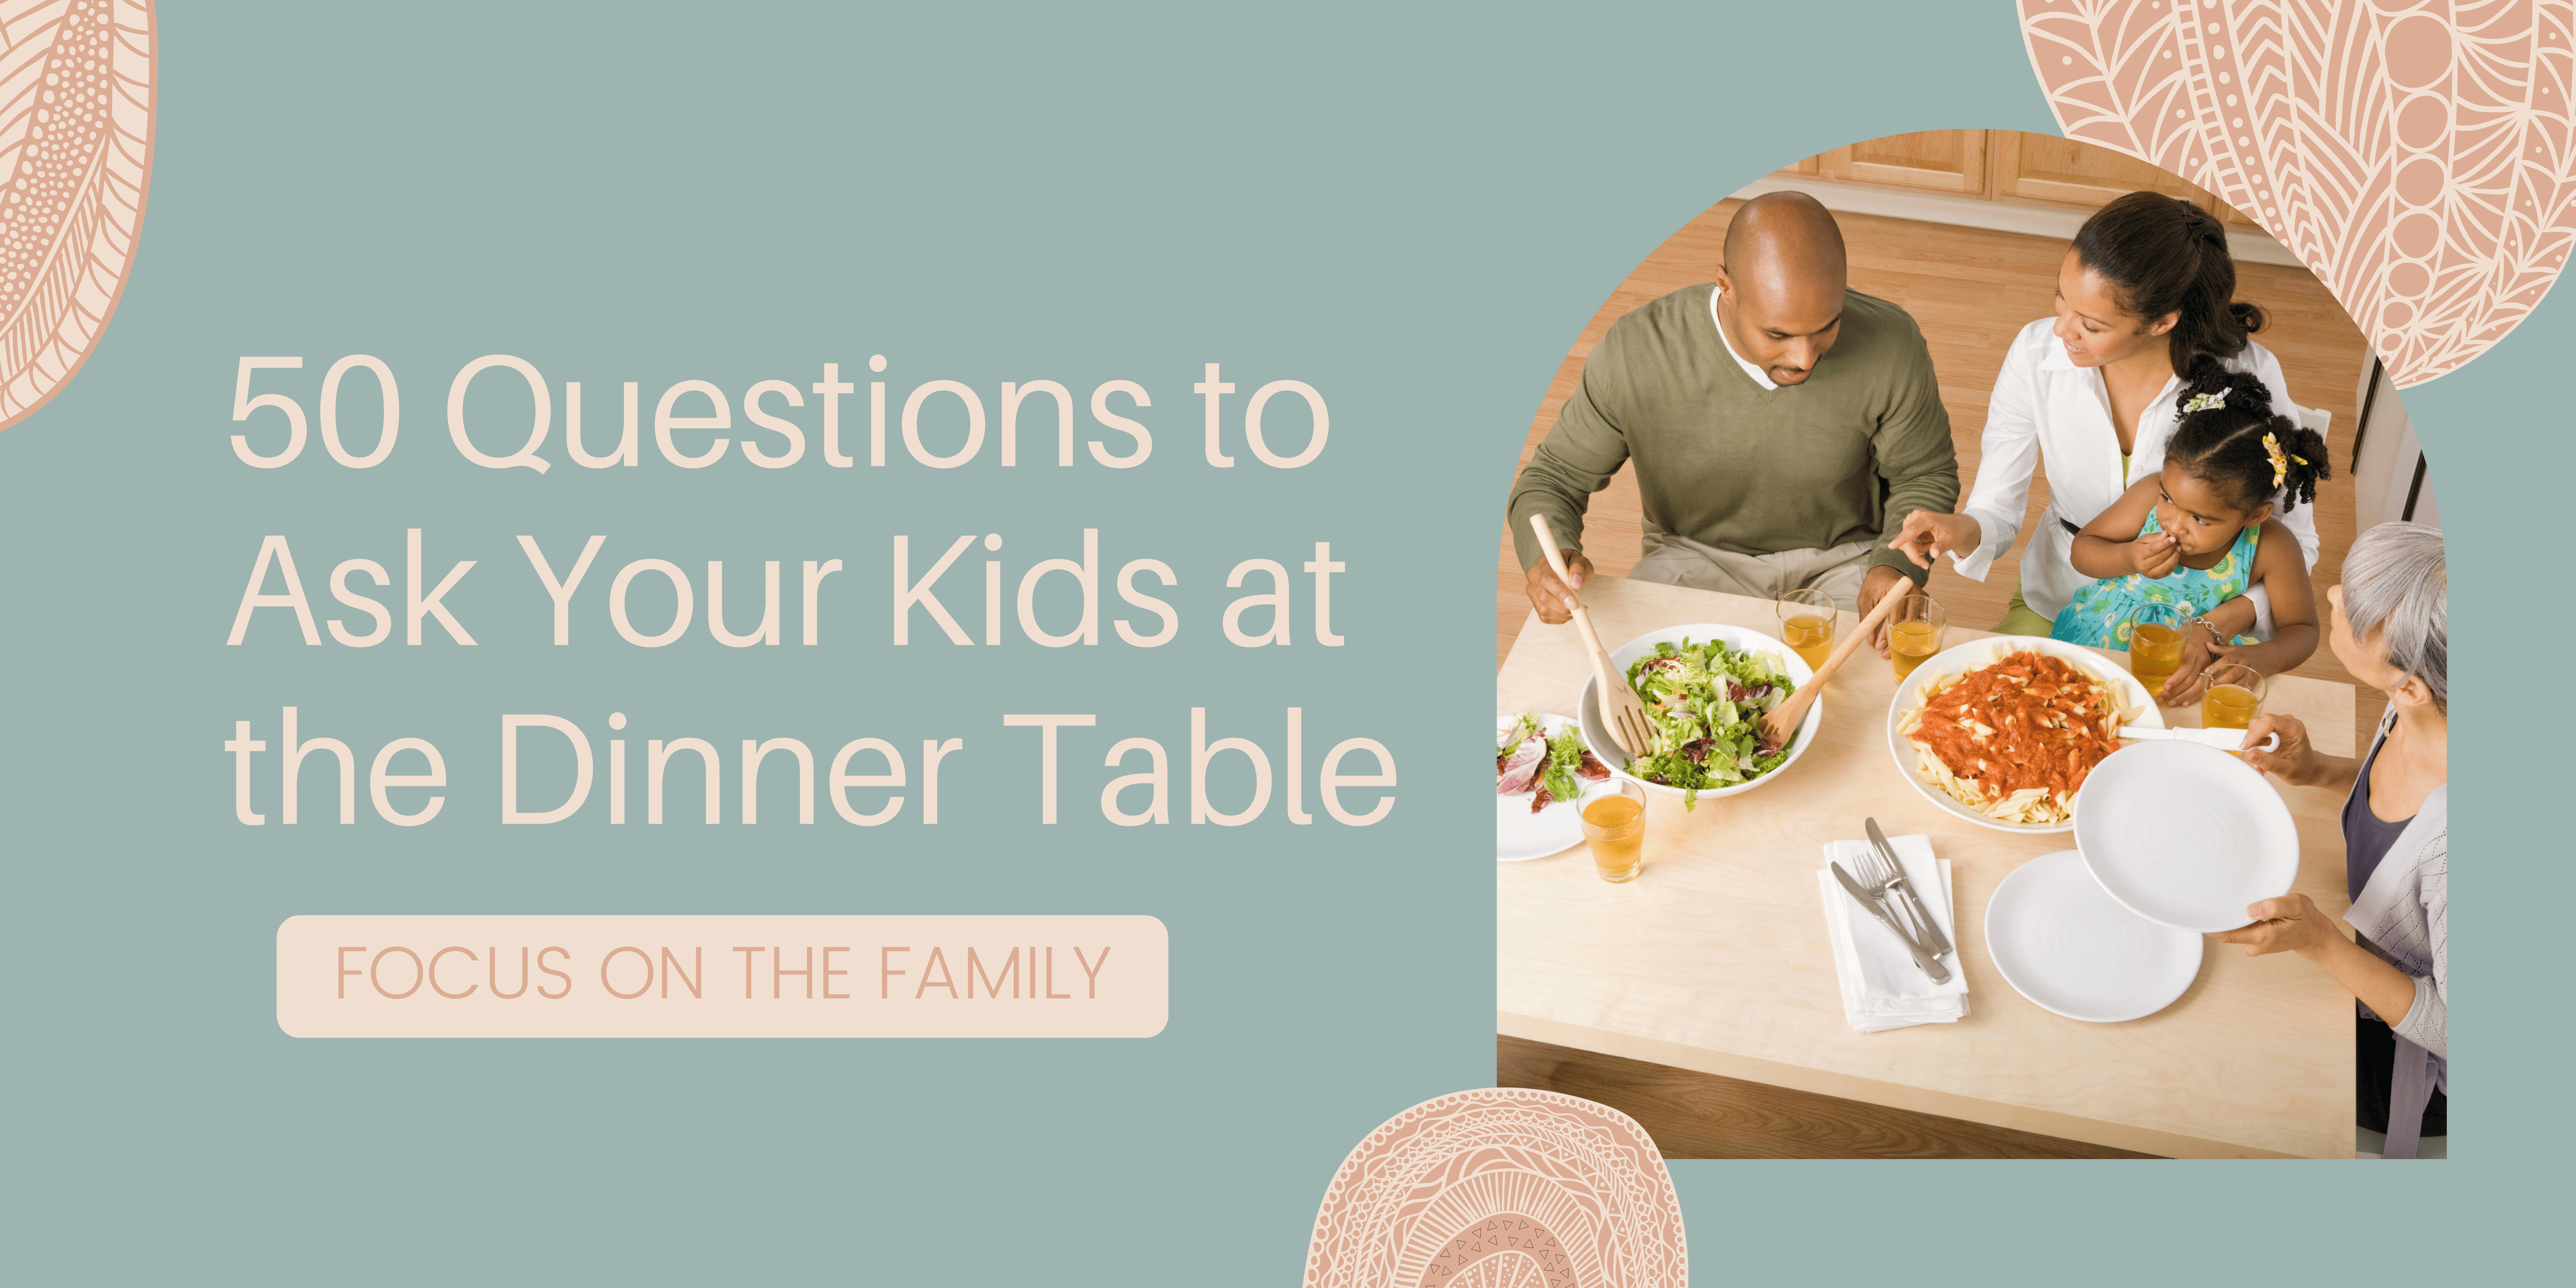 50 Questions to Ask Your Kids at the Dinner Table - Focus on the Family